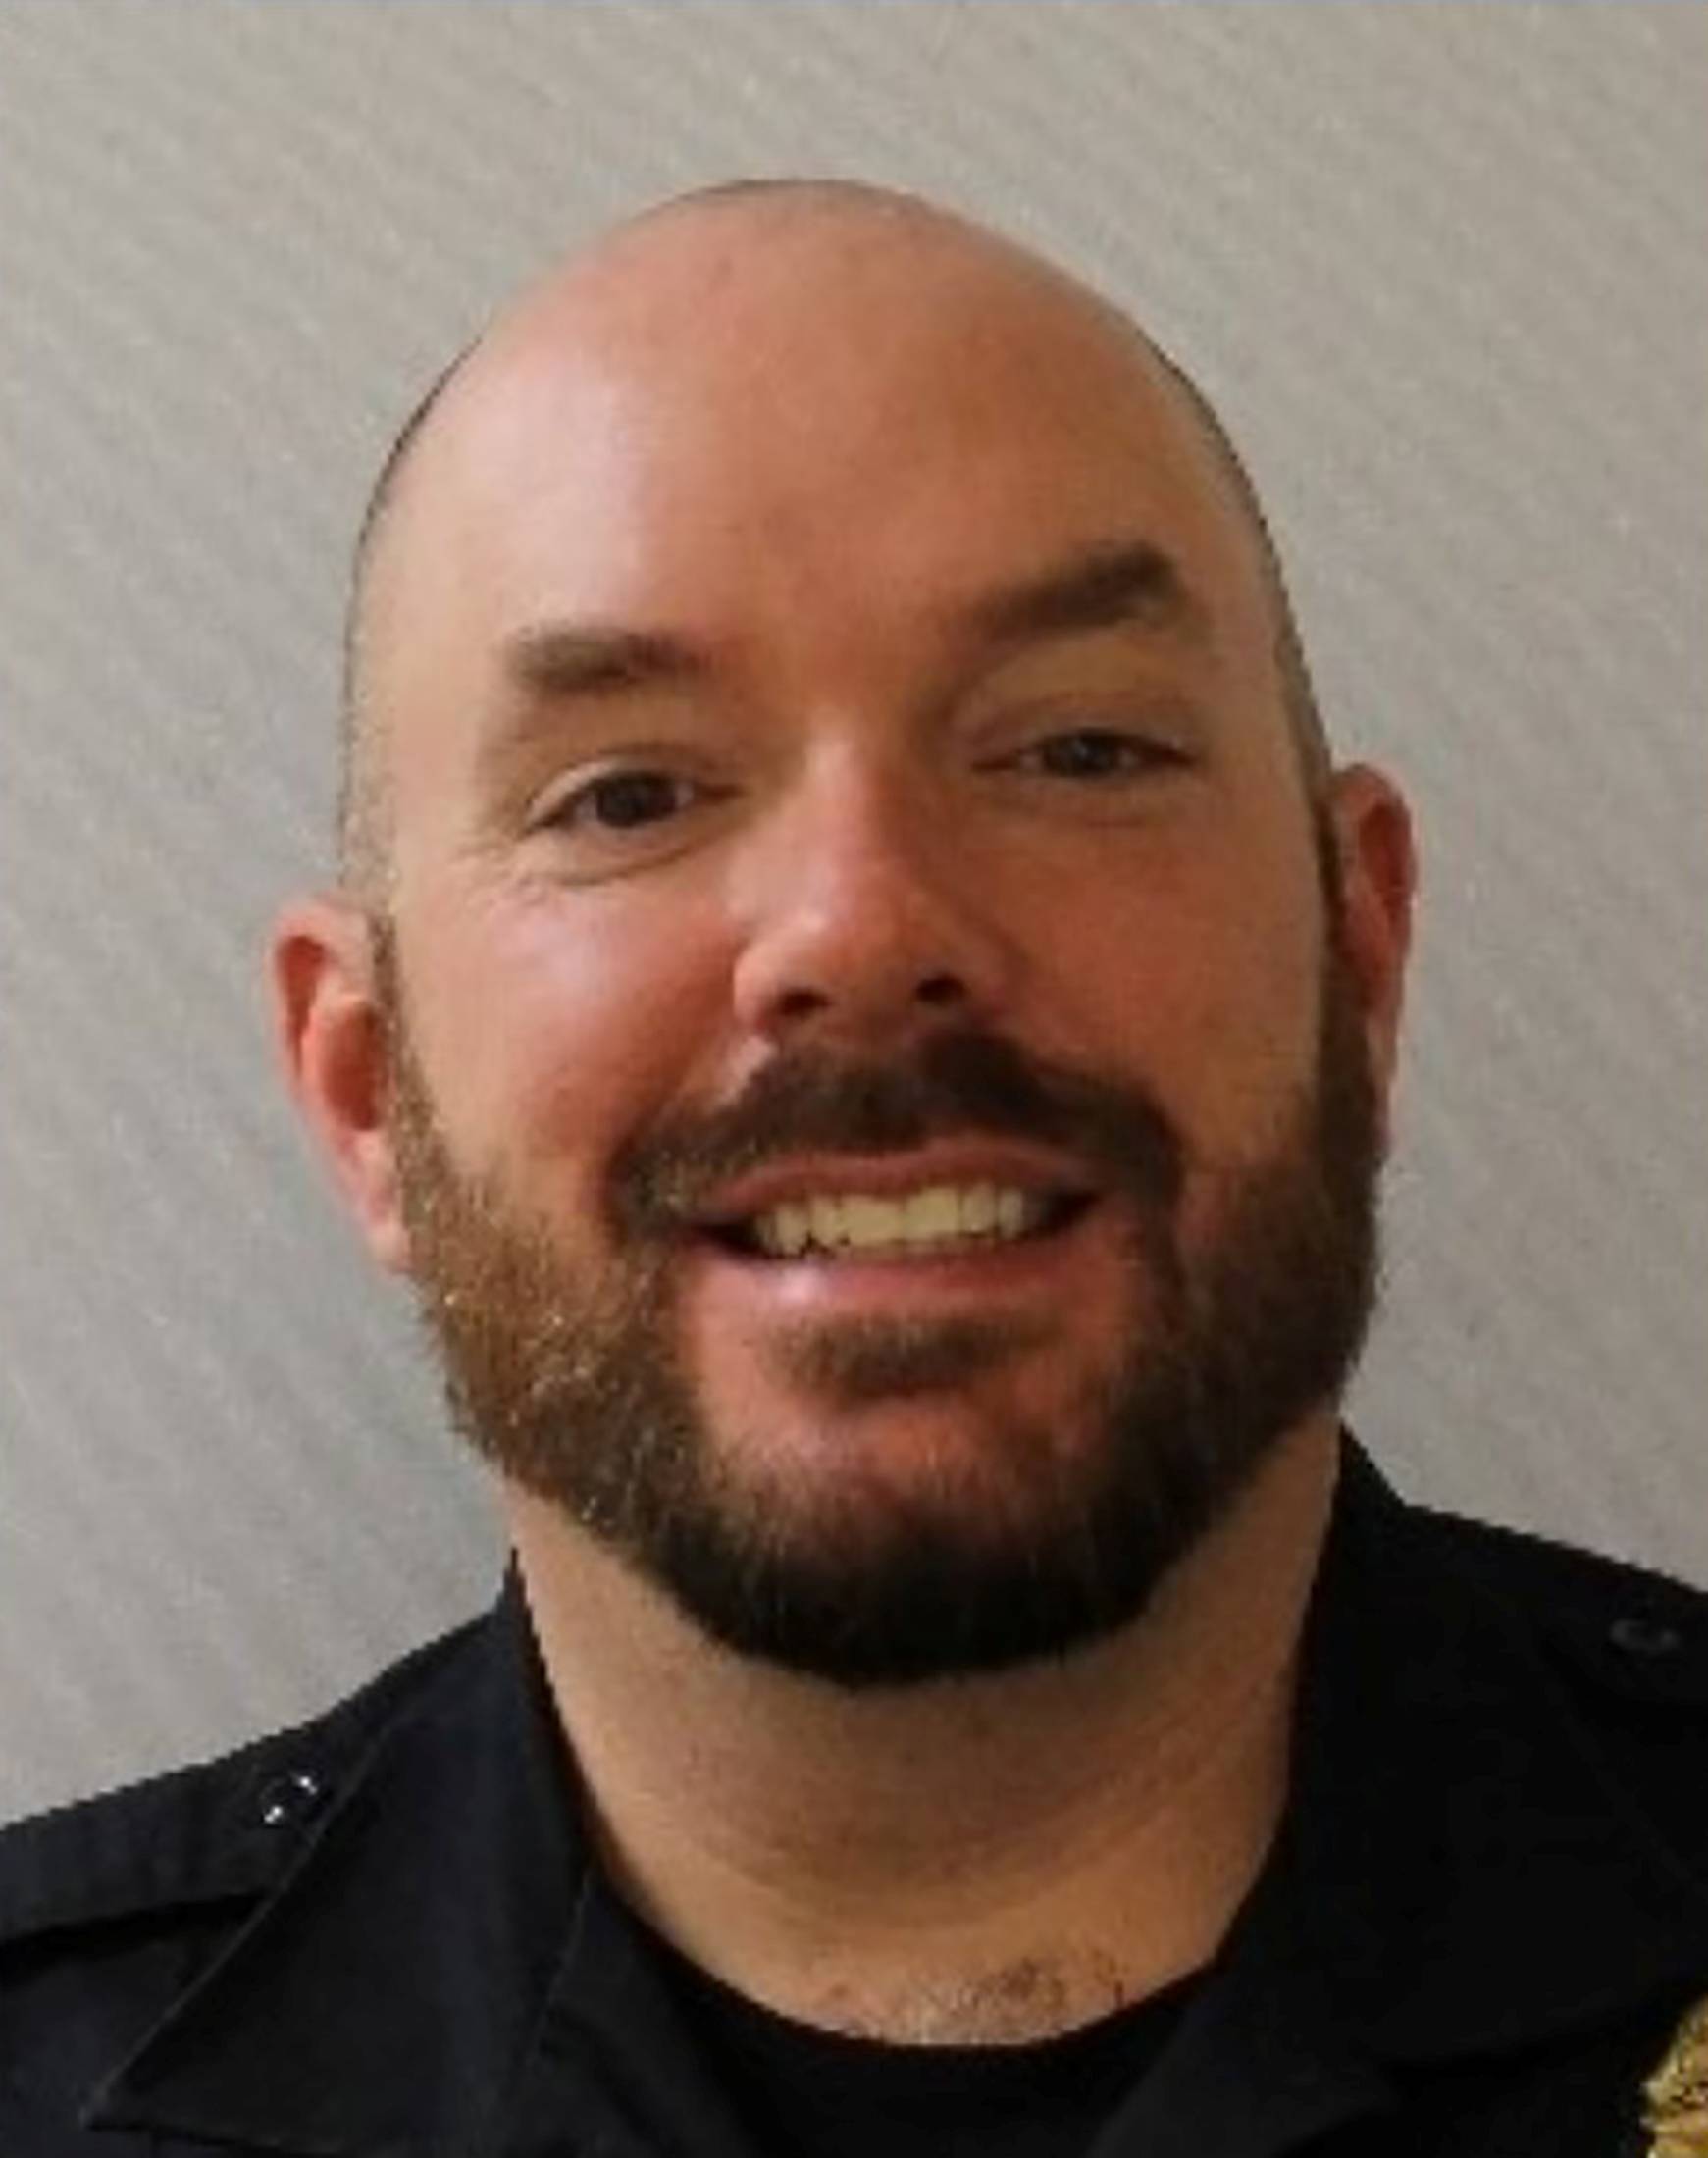 U.S. Capitol Police Officer William "Billy" Evans, who was killed in a violent incident in Washington